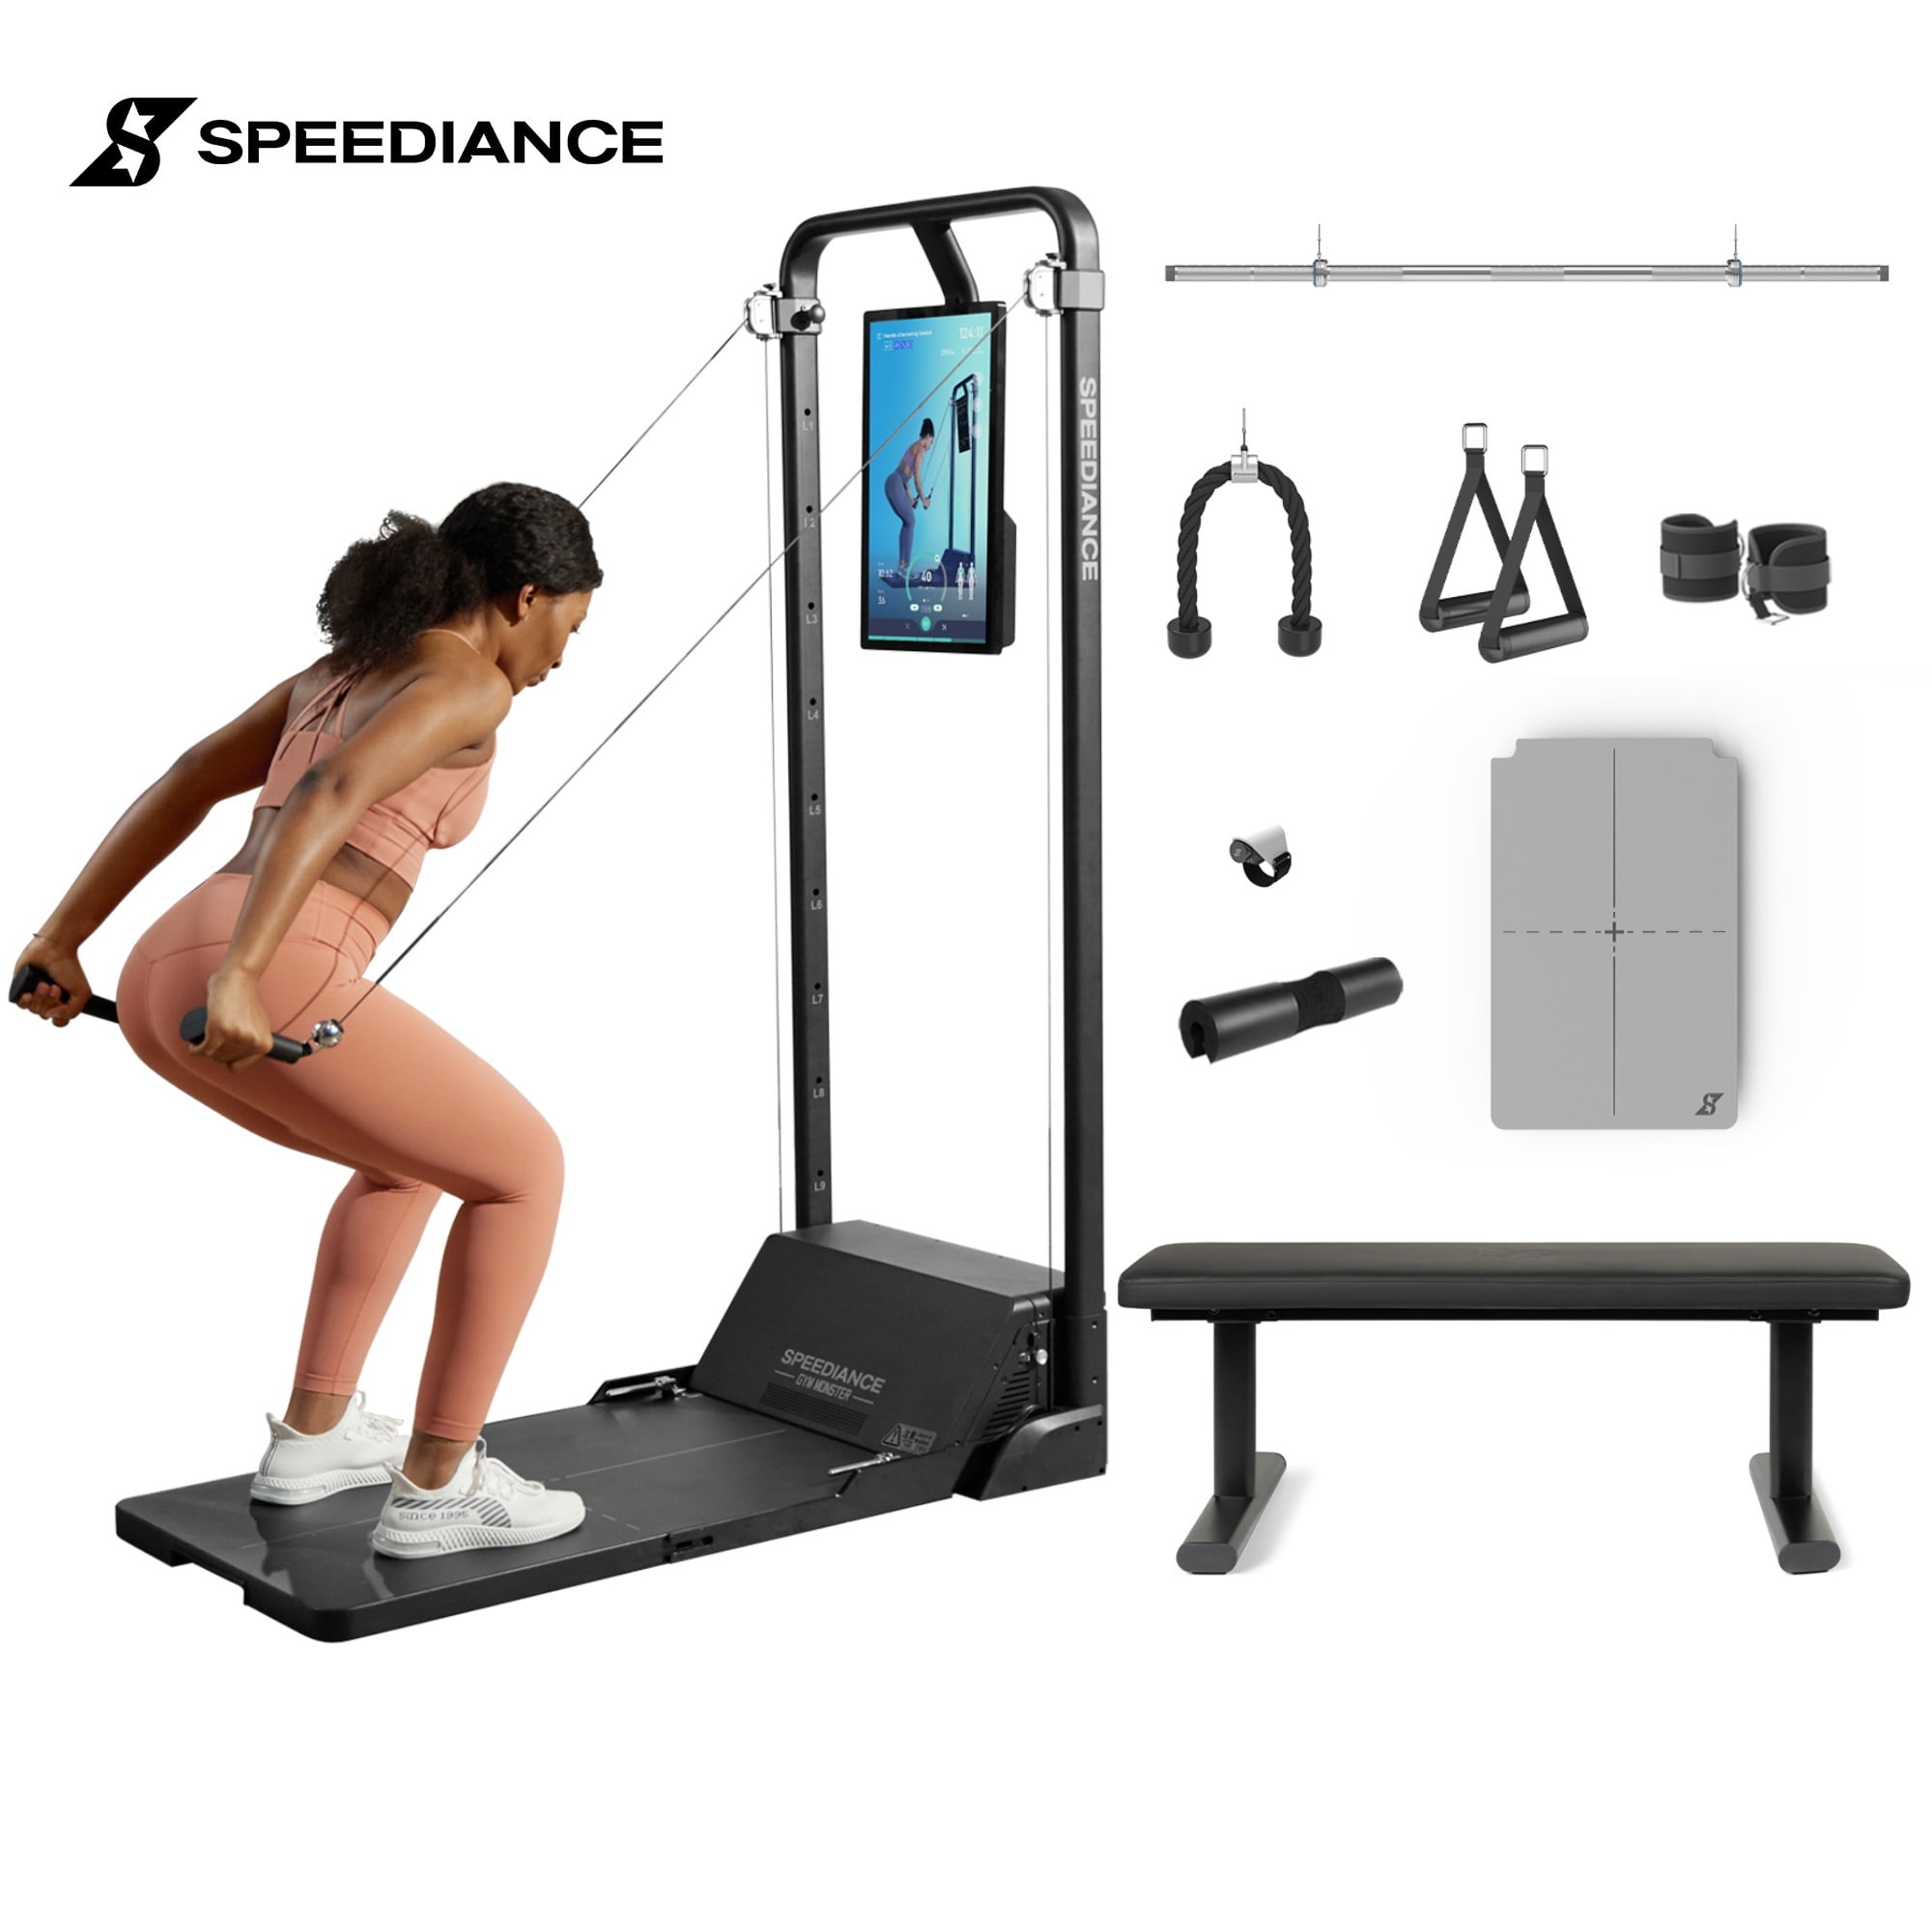 Speediance All-in-One Smart Home Gym,Full Body Digital Resistance Training  Machine,Strength Training Cardio Bench Press with Personalized Workouts  Programs Fitness Trainer Equipment Foldable,Work Plus 